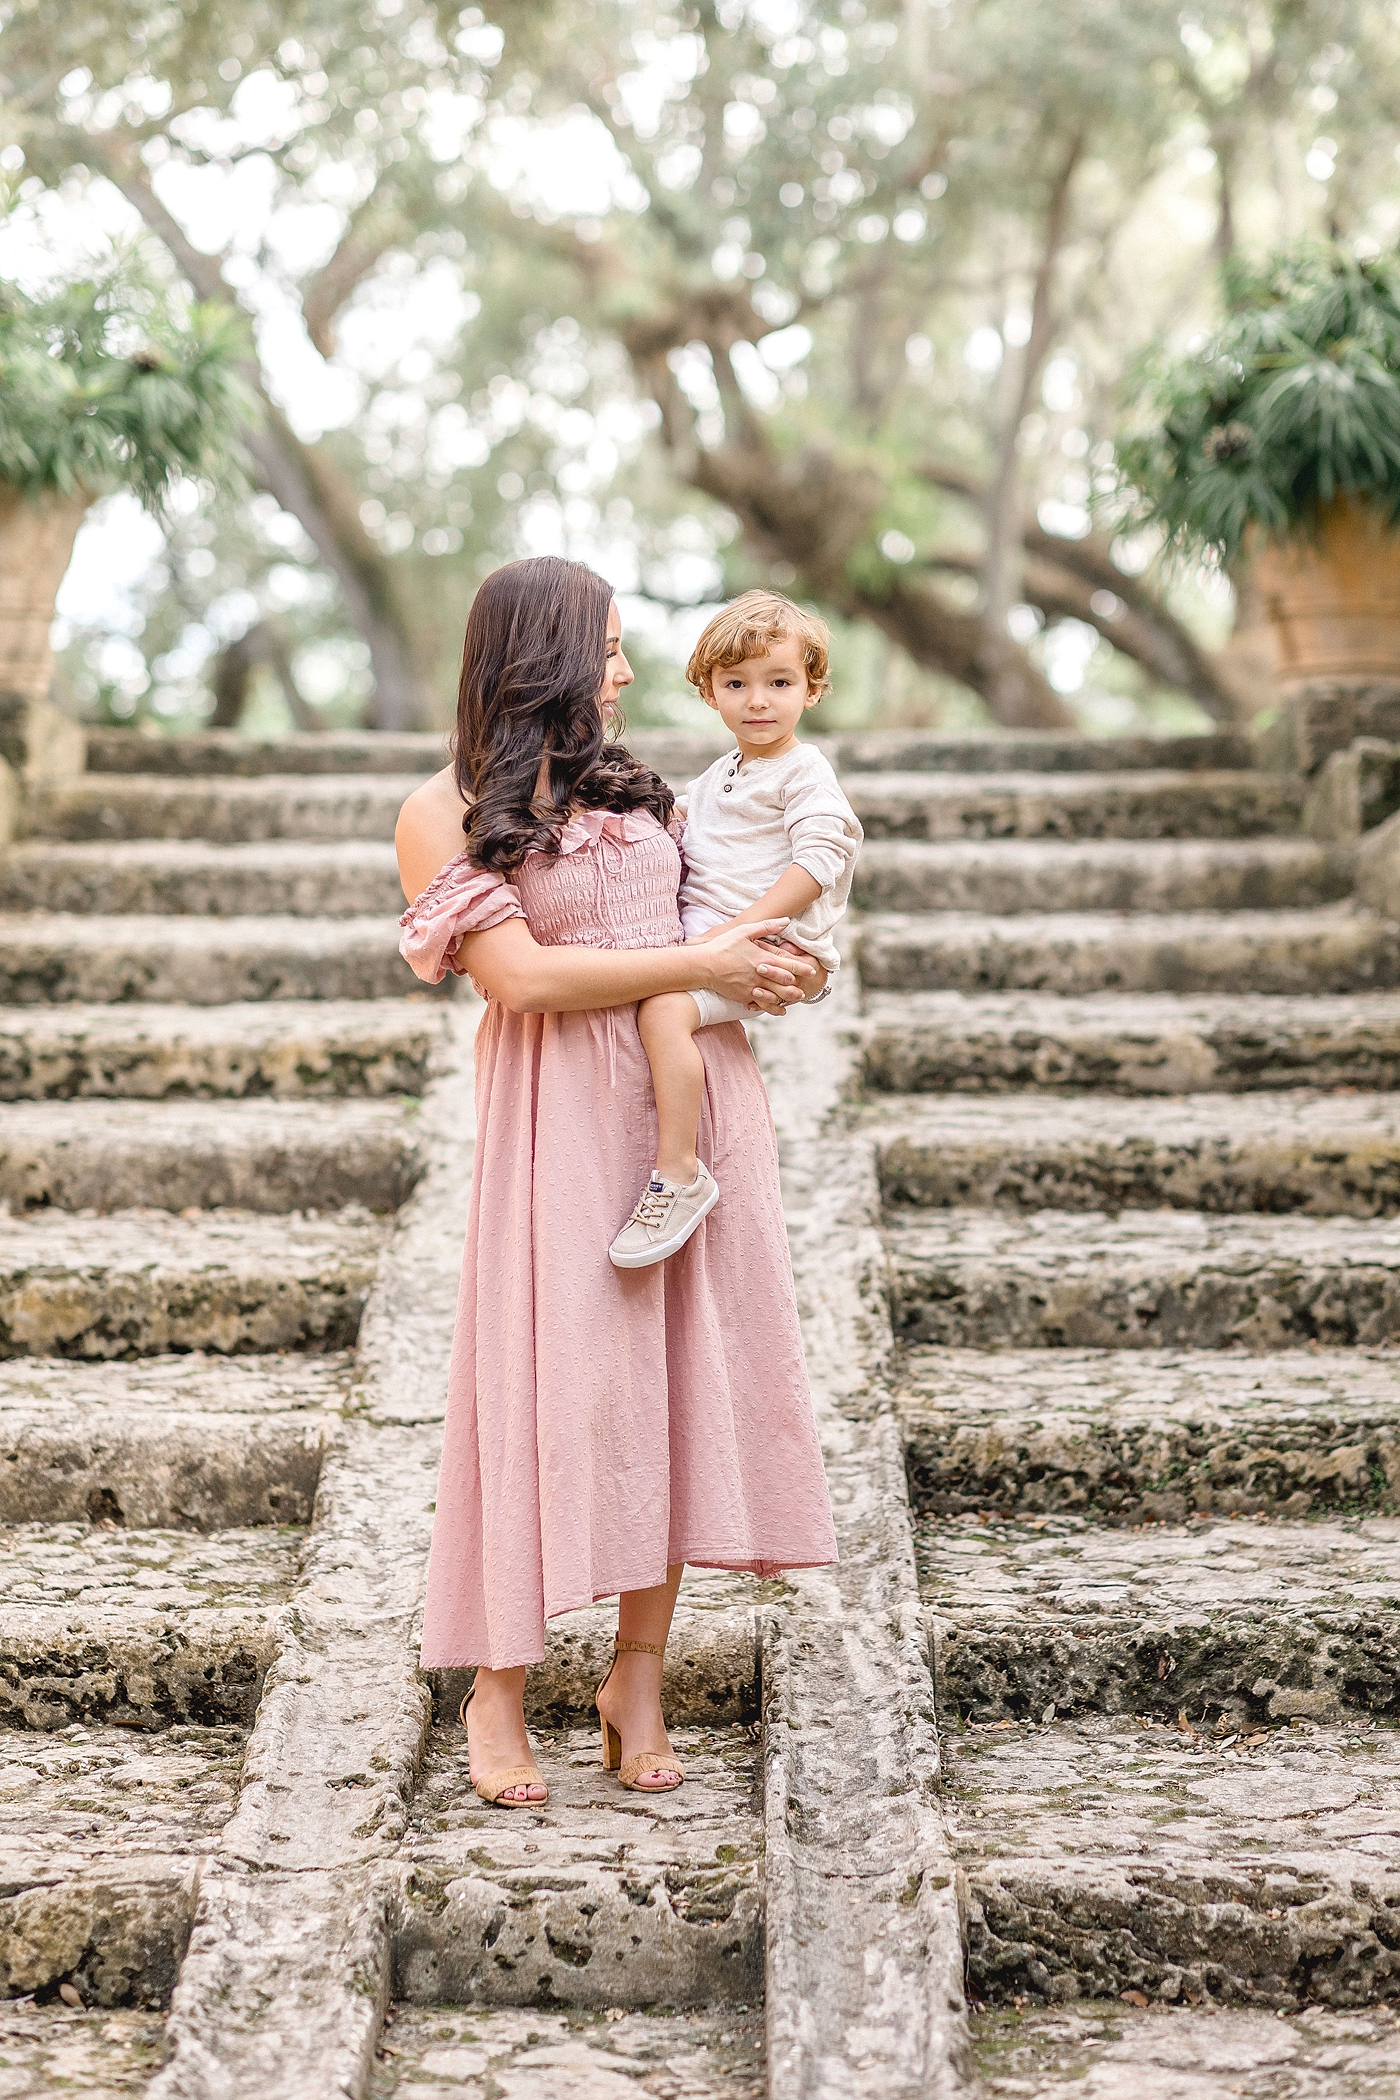 Mom holds son on set of ancient looking stairs during Vizcaya Family photoshoot. Images by Ivanna Vidal Photography.